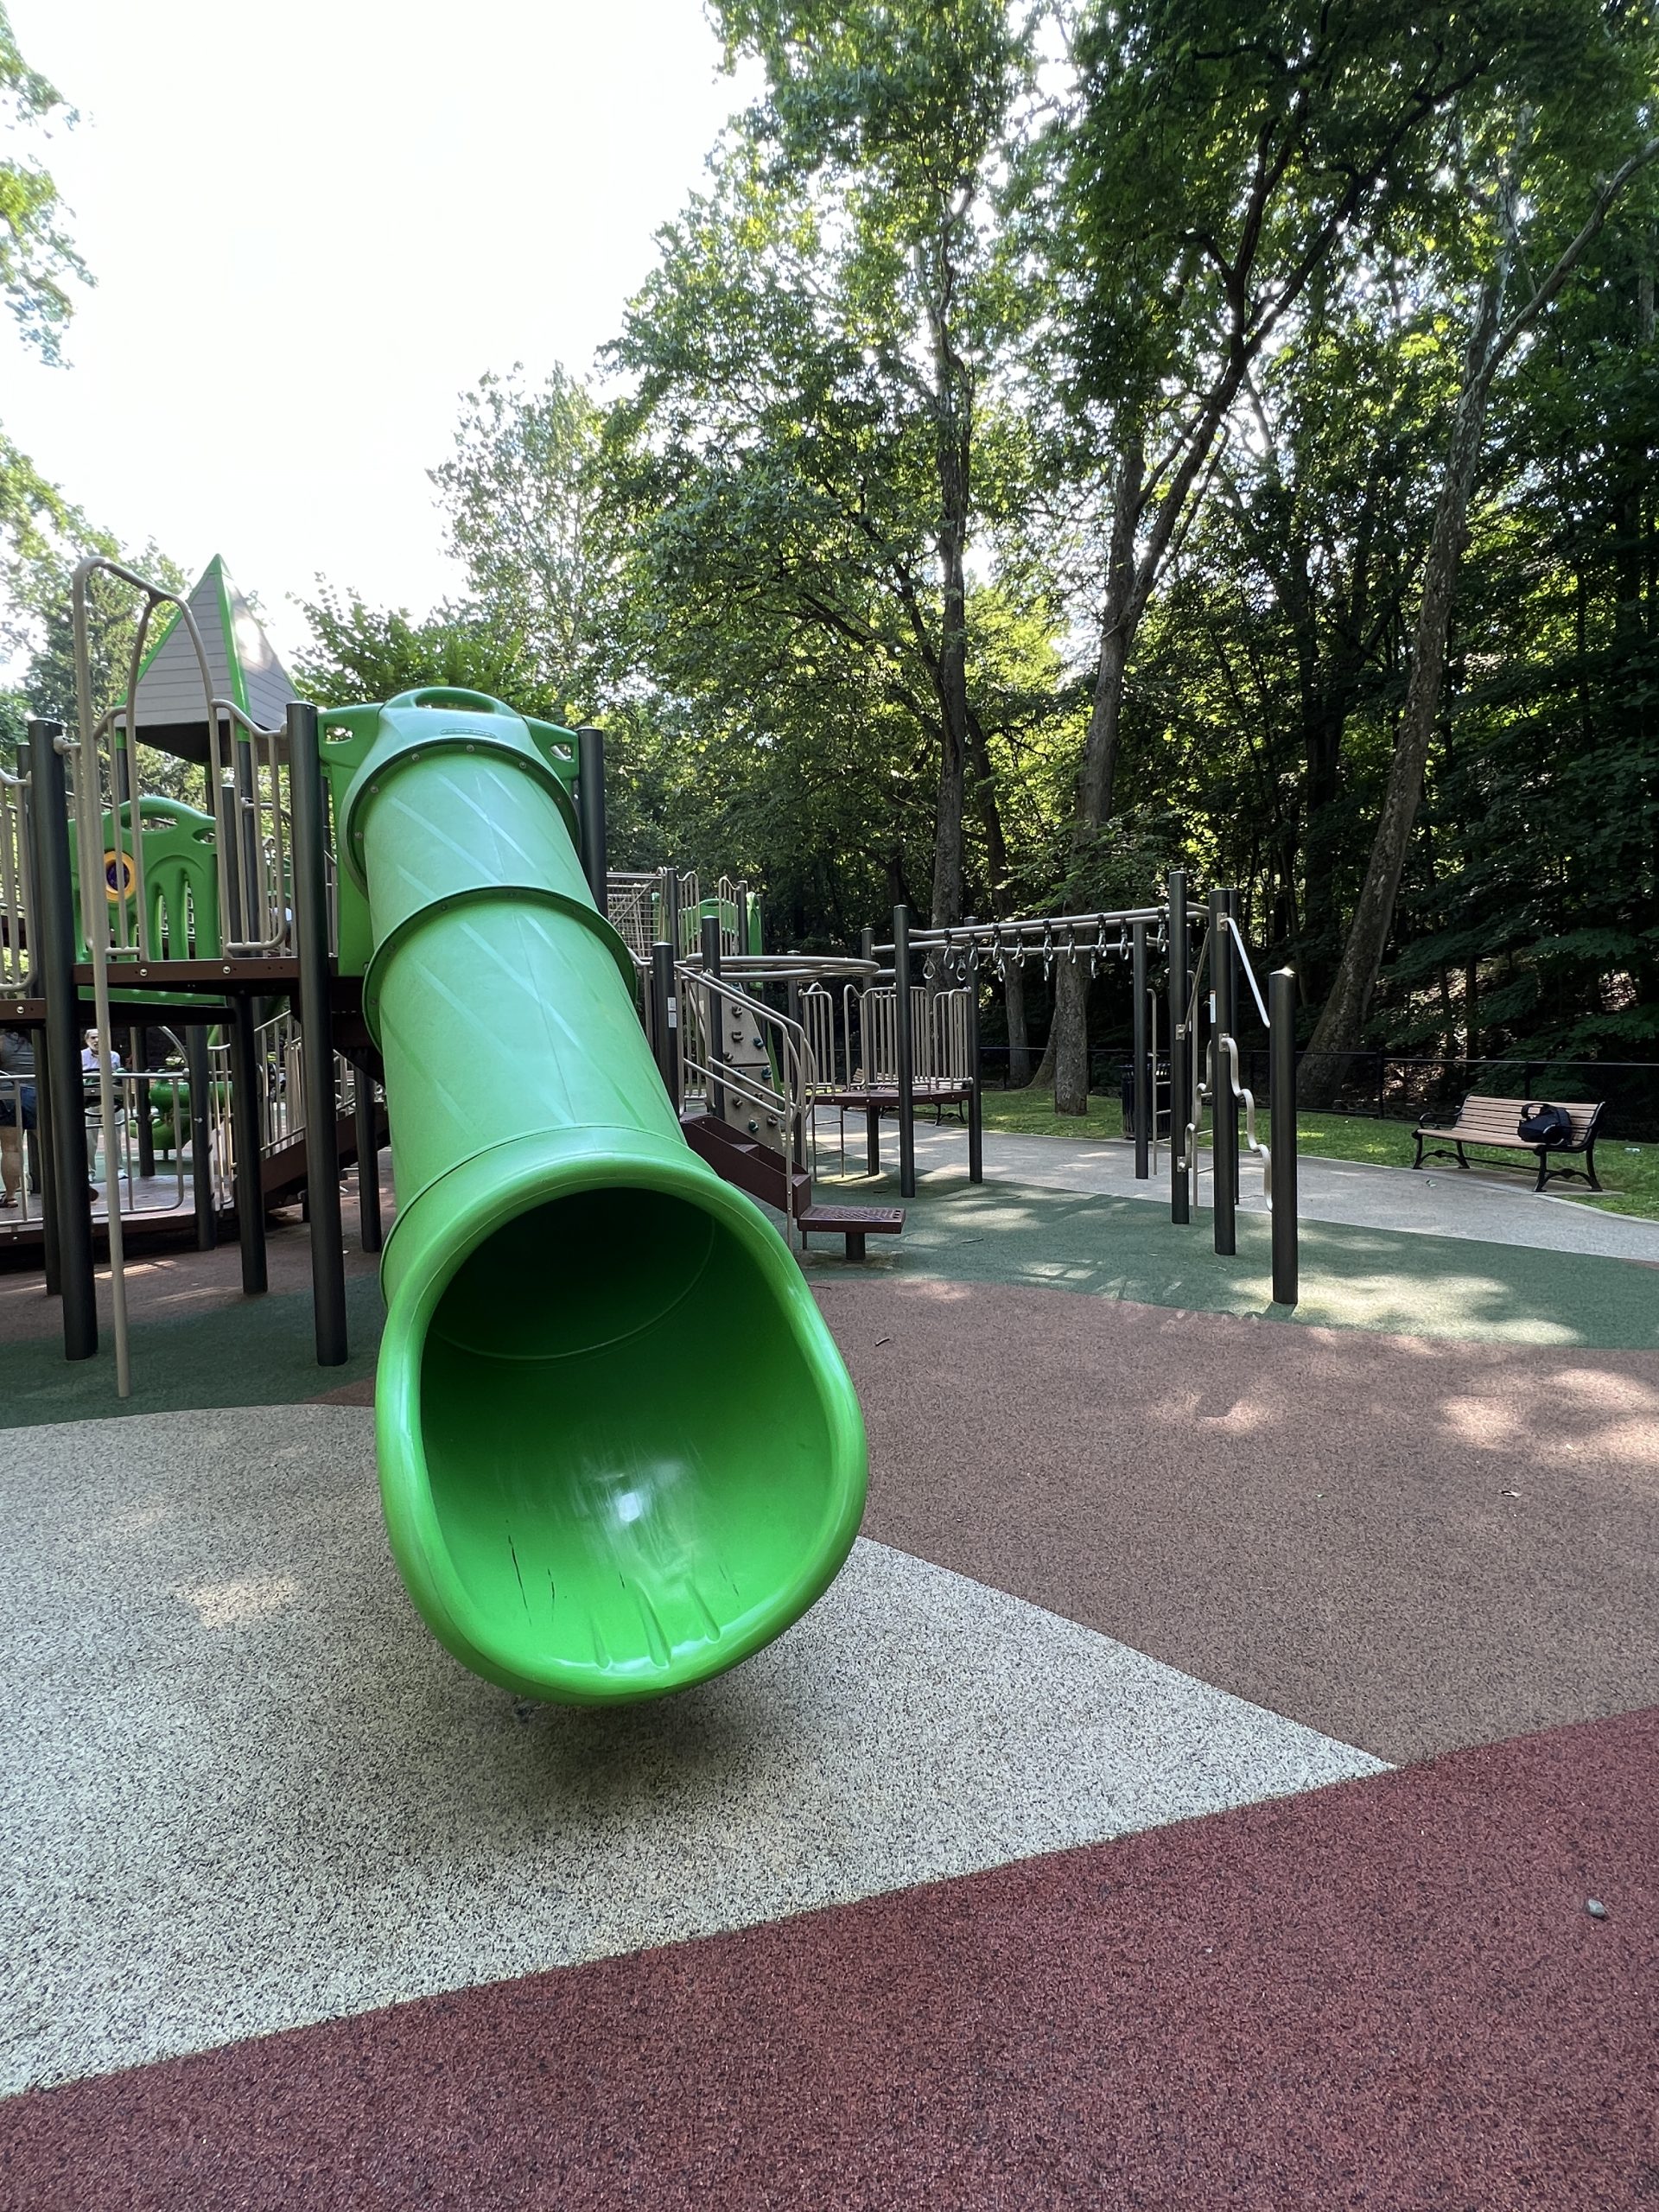 Grover Cleveland Playgrounds in Caldwell NJ - Large Playground Structure - SLIDE tunnel straight